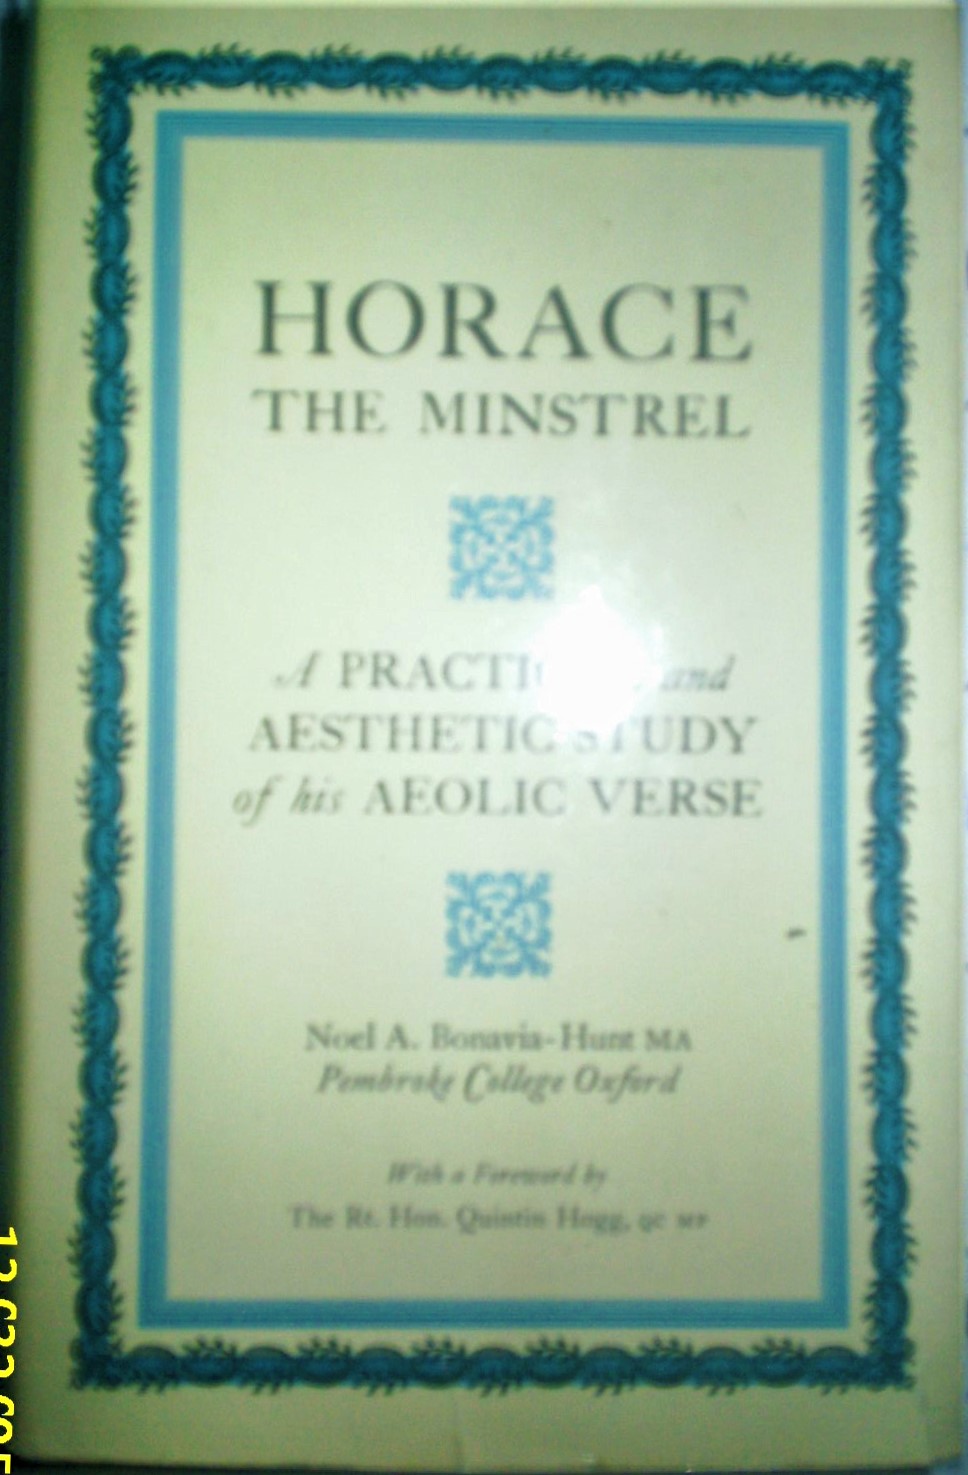 horace the minstrel: a practical and aesthetic study of his aeolic verse